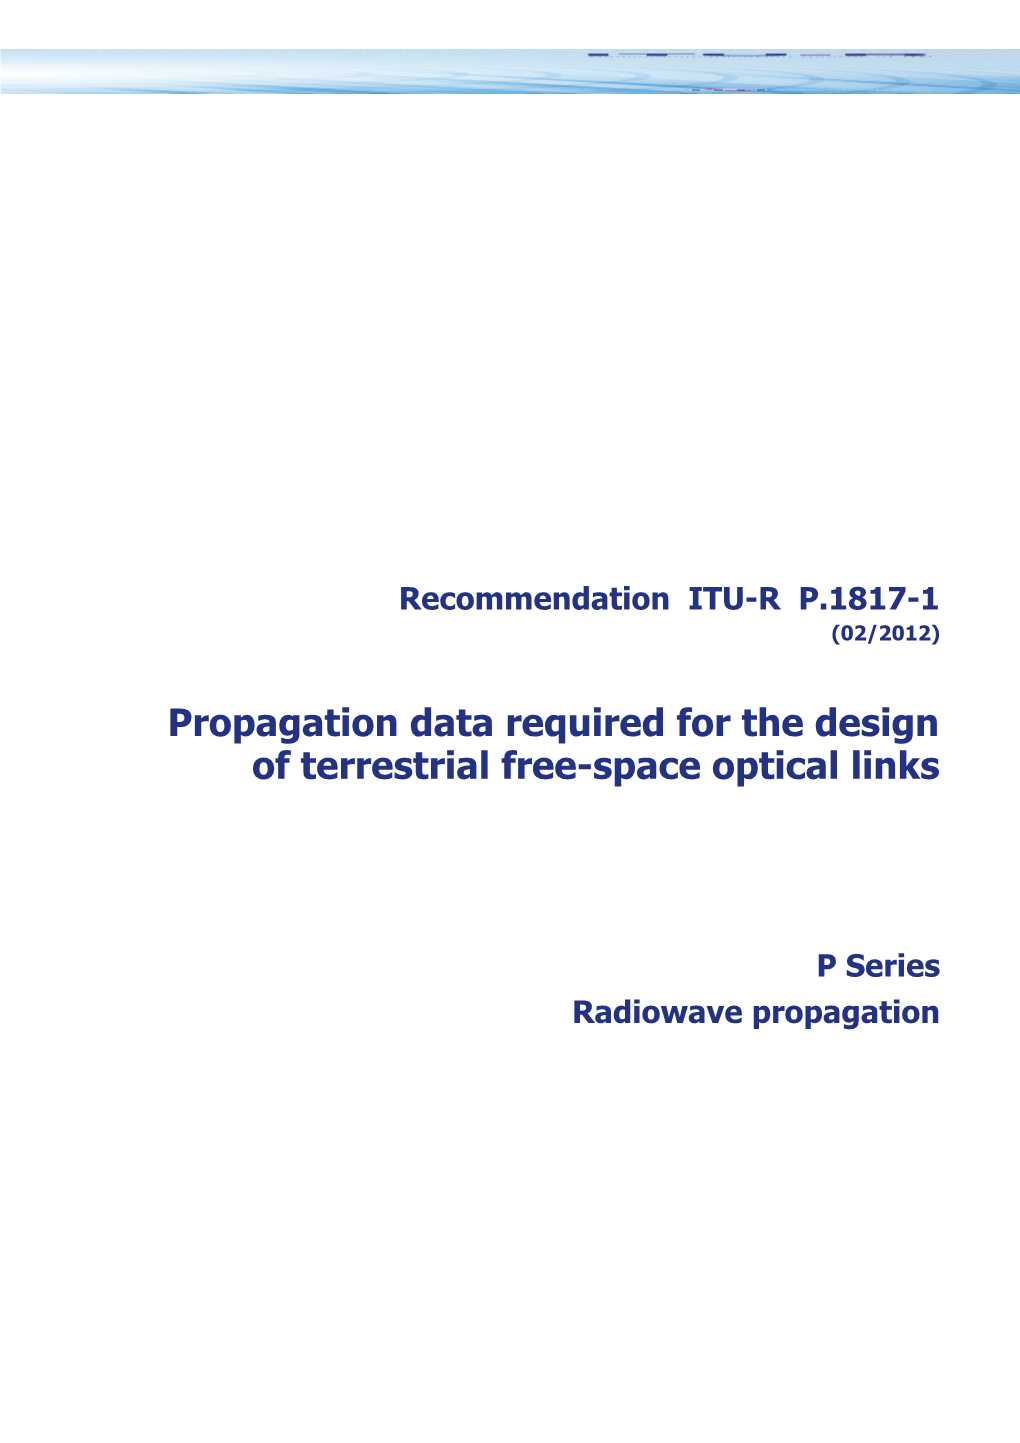 RECOMMENDATION ITU-R P.1817-1 - Propagation Data Required for the Design of Terrestrial